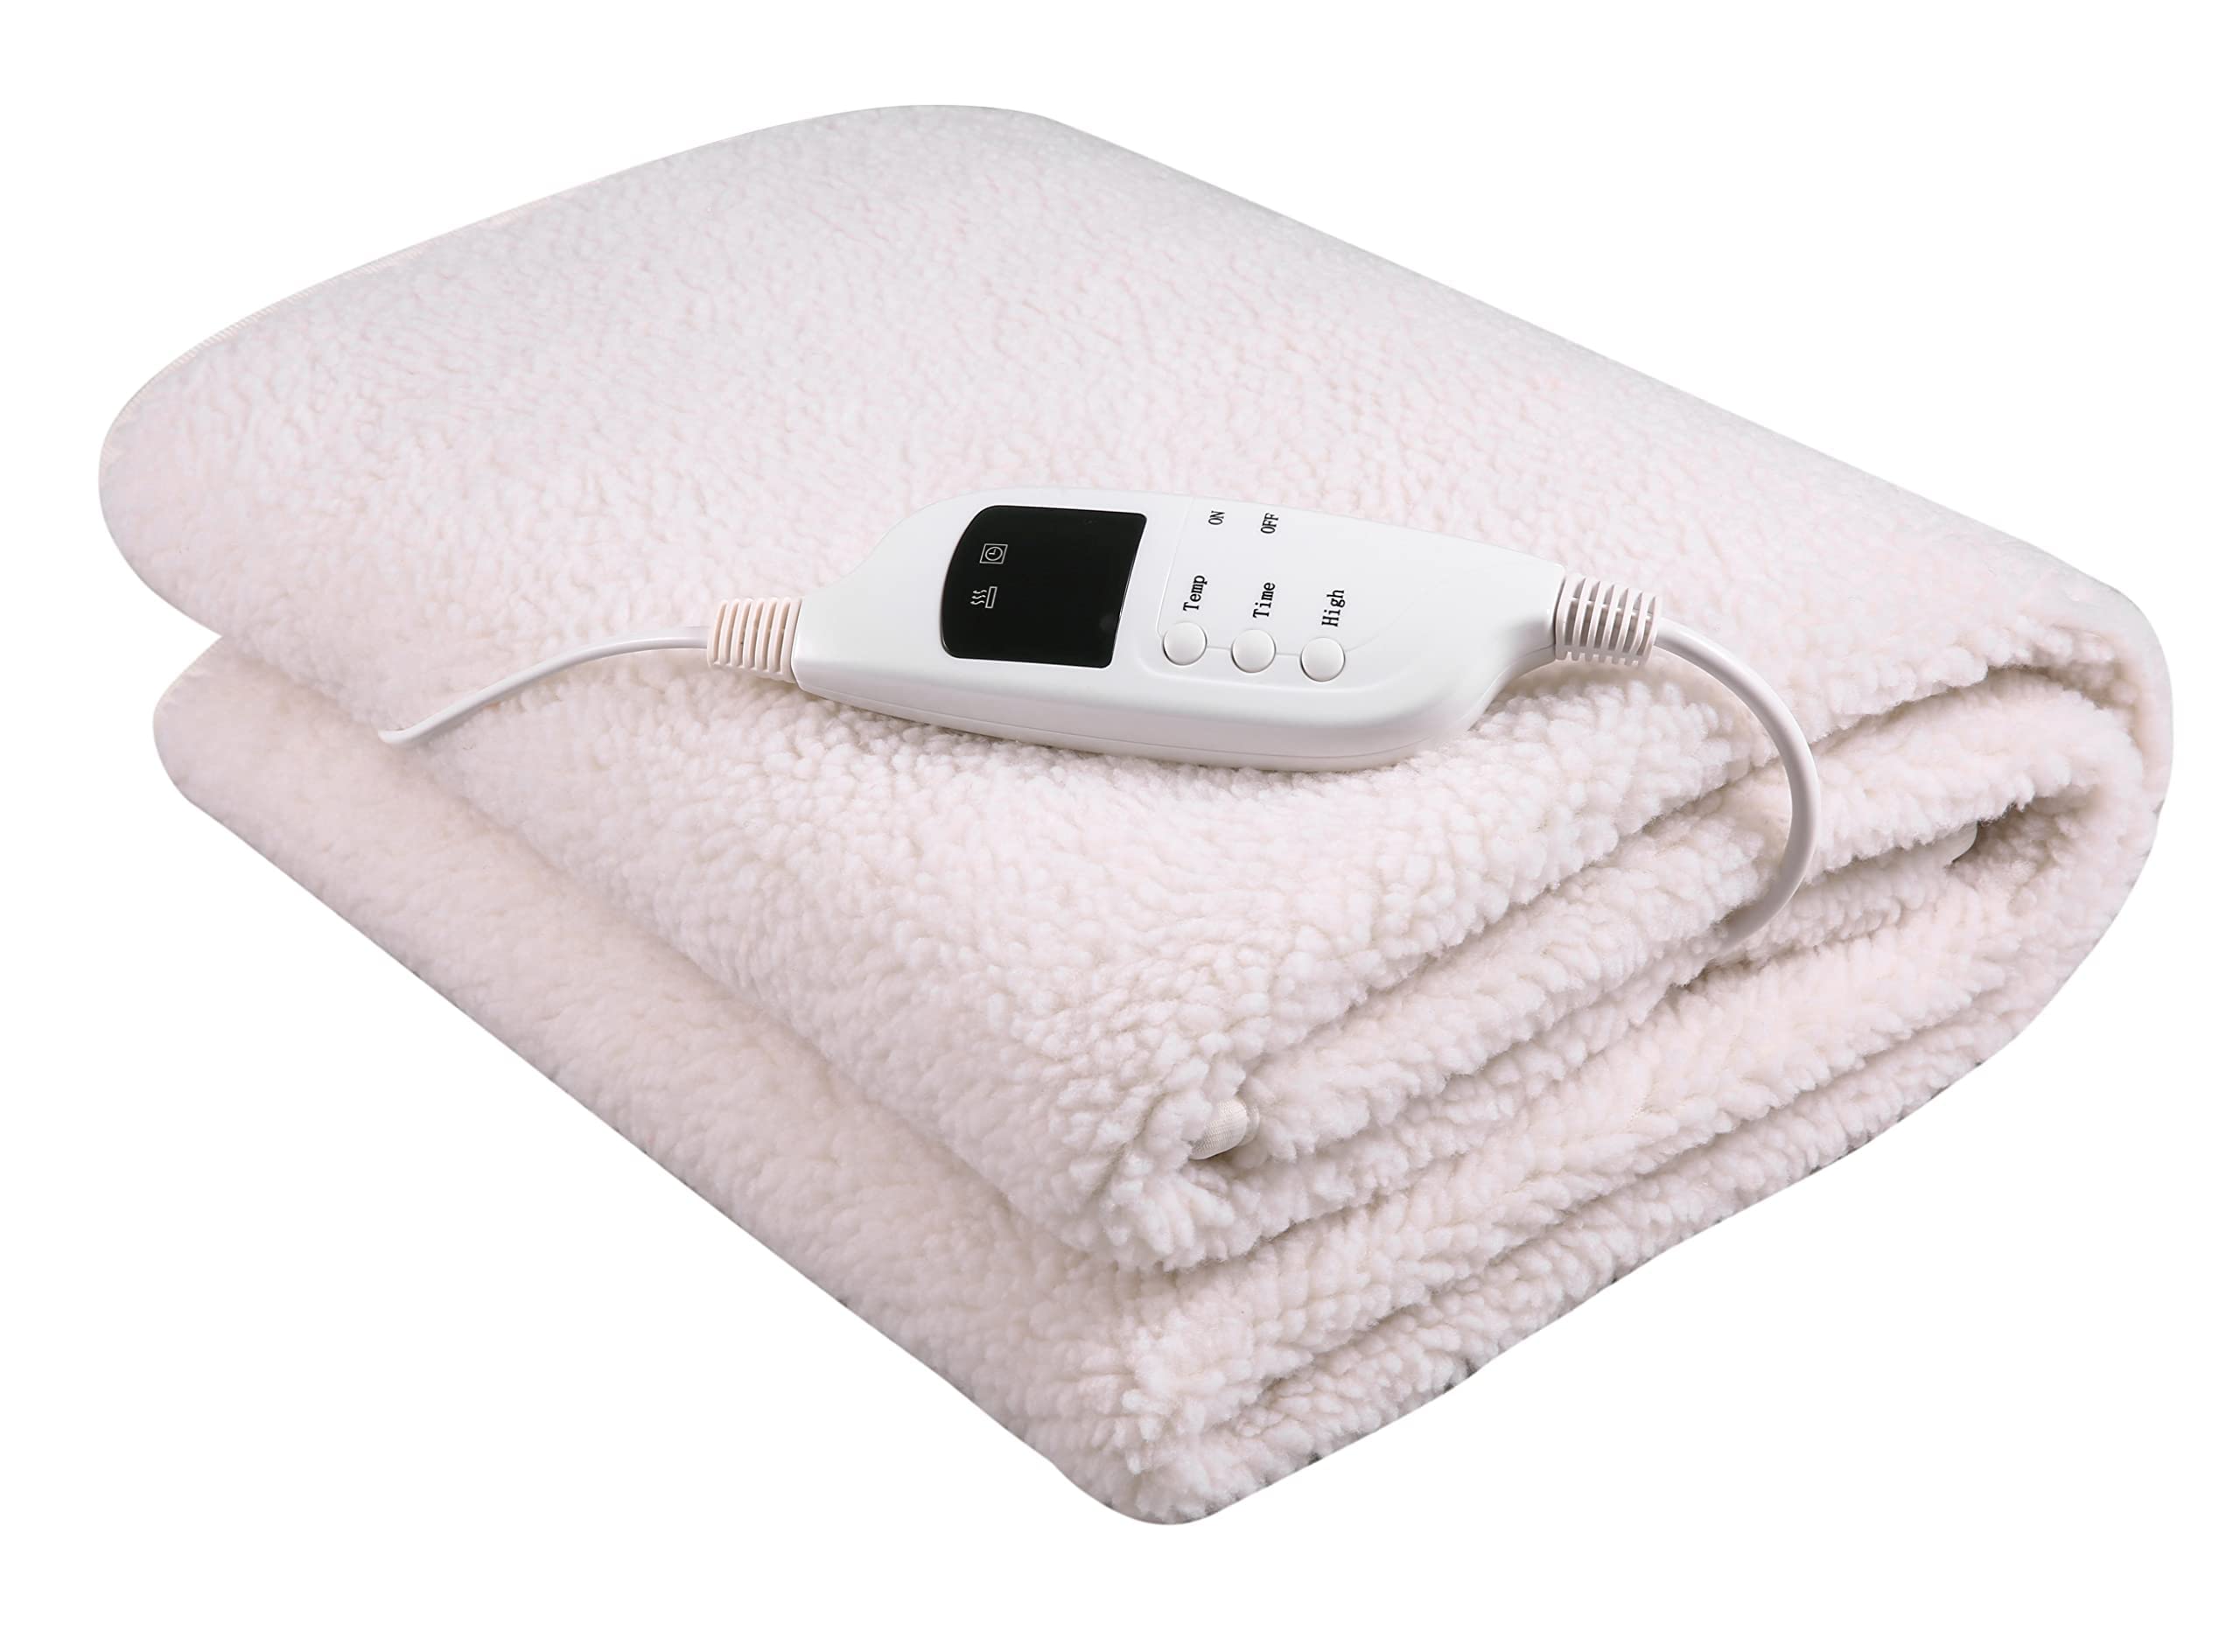 Deluxe Fleece Massage Table Warmer w 12 Foot Power Cord. for Use with Massage Tables Only Do Not Use as a Bed Blanket Warm